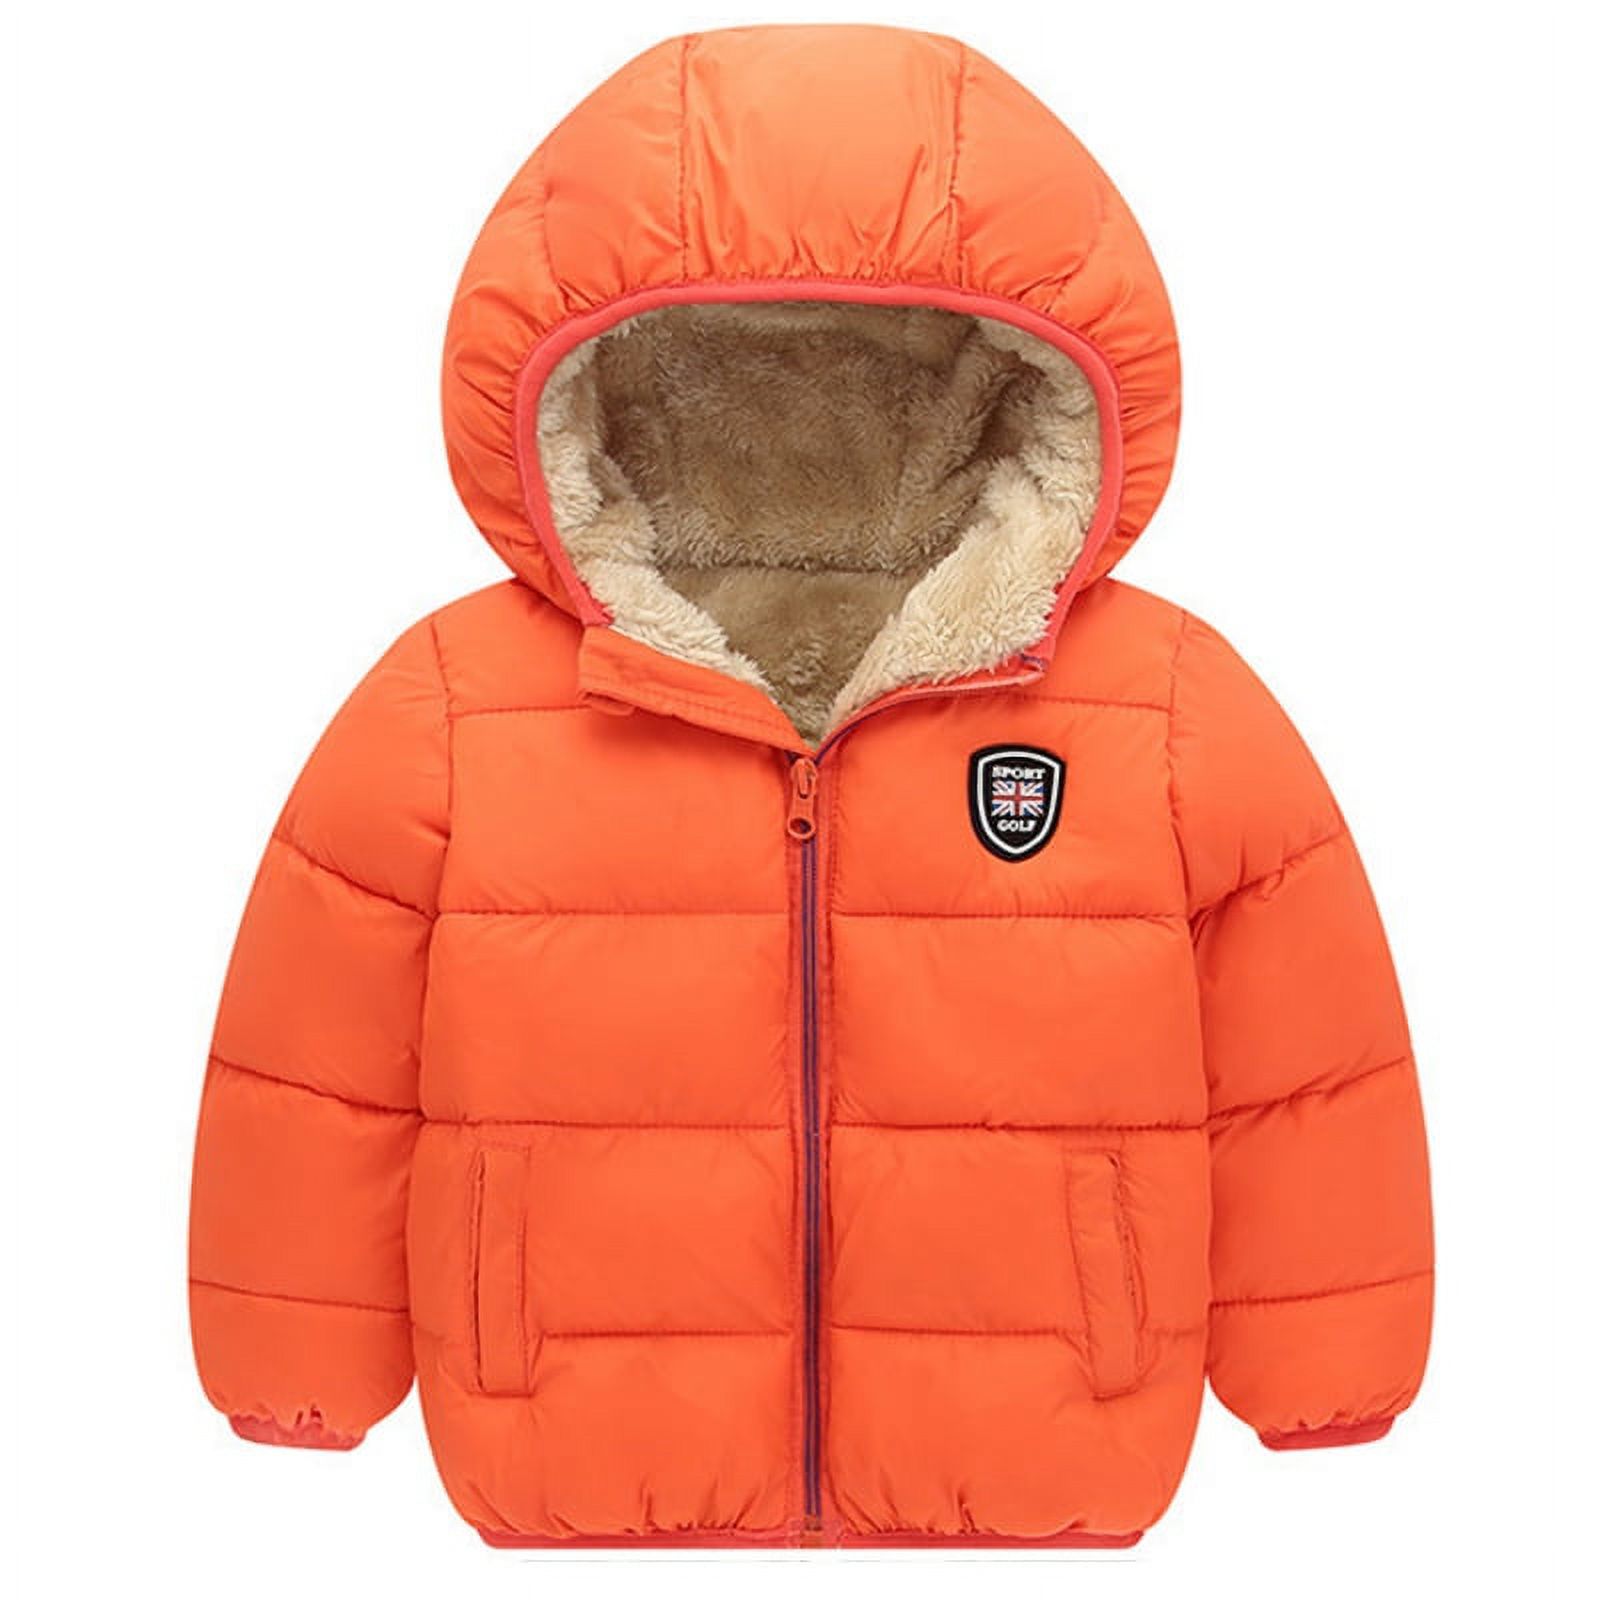 Winter Children Kid's Boy Girl Warm Hooded Jacket Coat Cotton-padded Jacket Parka Overcoat Thick Down Coat for 2-7T - image 1 of 2